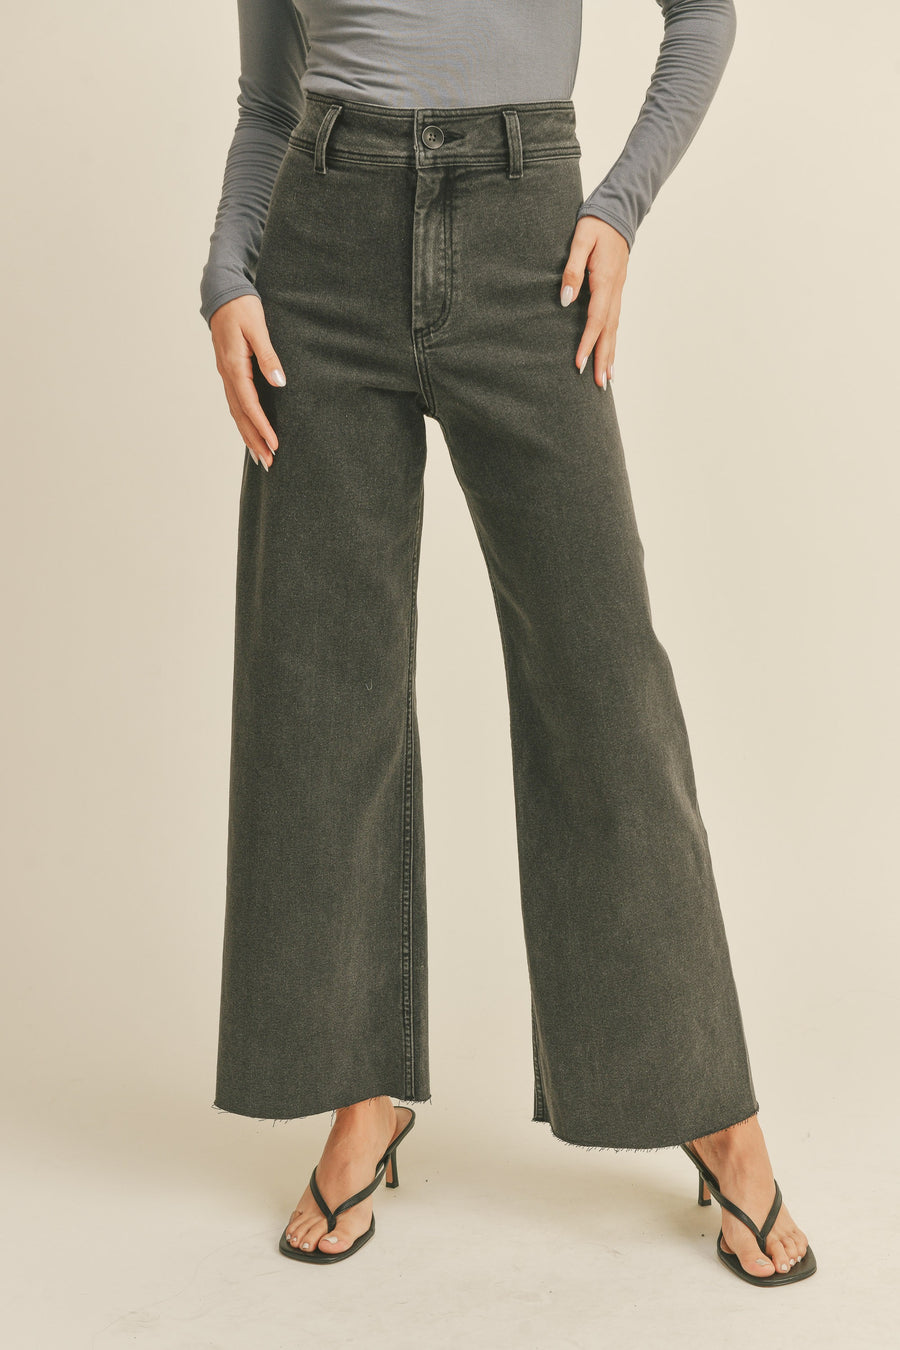 Denim wide leg jeans with an ankle cut in the color washed black.